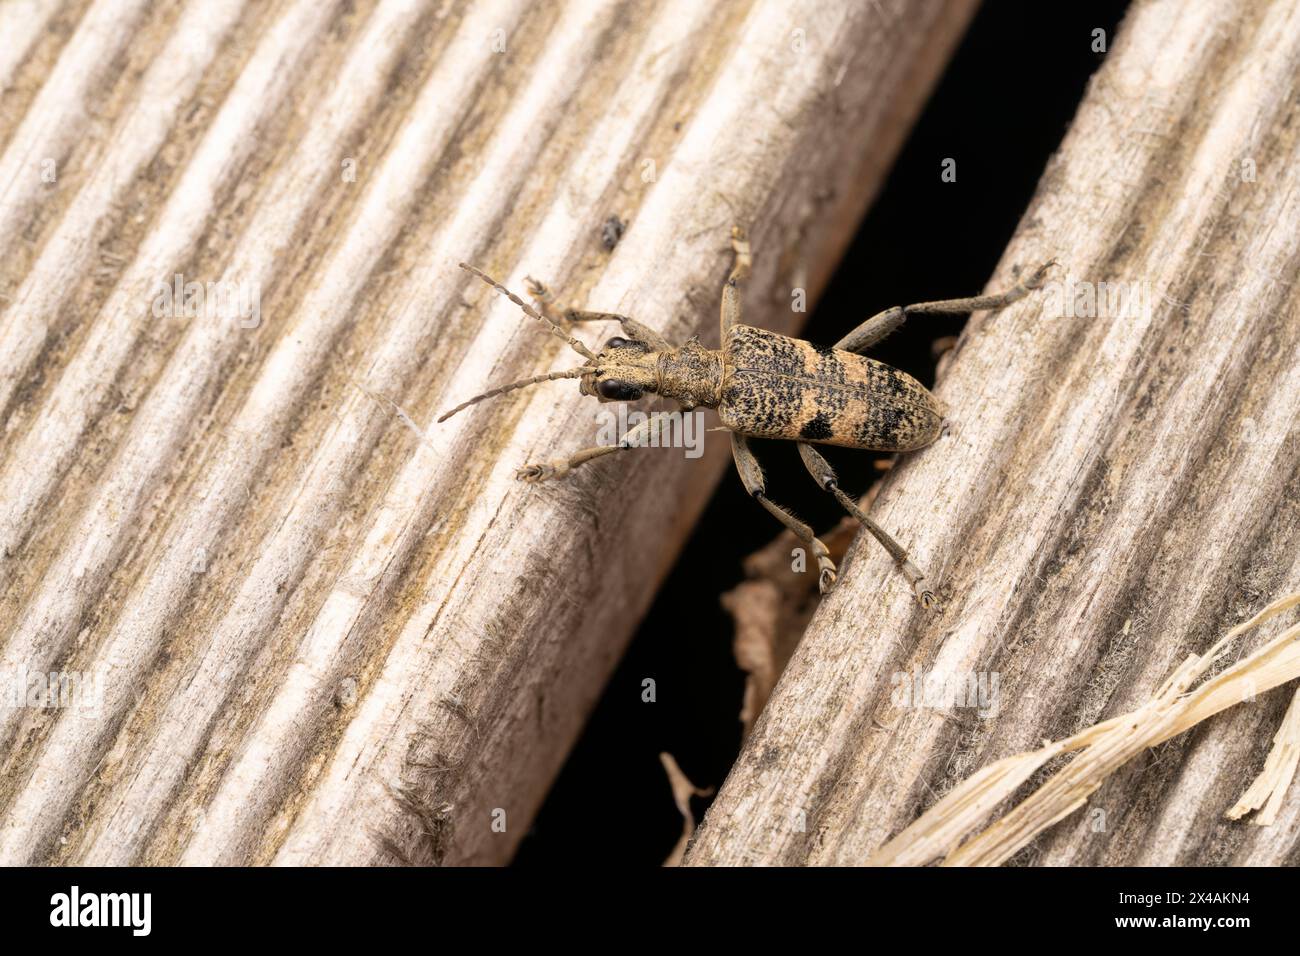 Rhagium mordax Family Cerambycidae Genus Rhagium Black-spotted longhorn beetle wild nature insect photography, picture, wallpaper Stock Photo